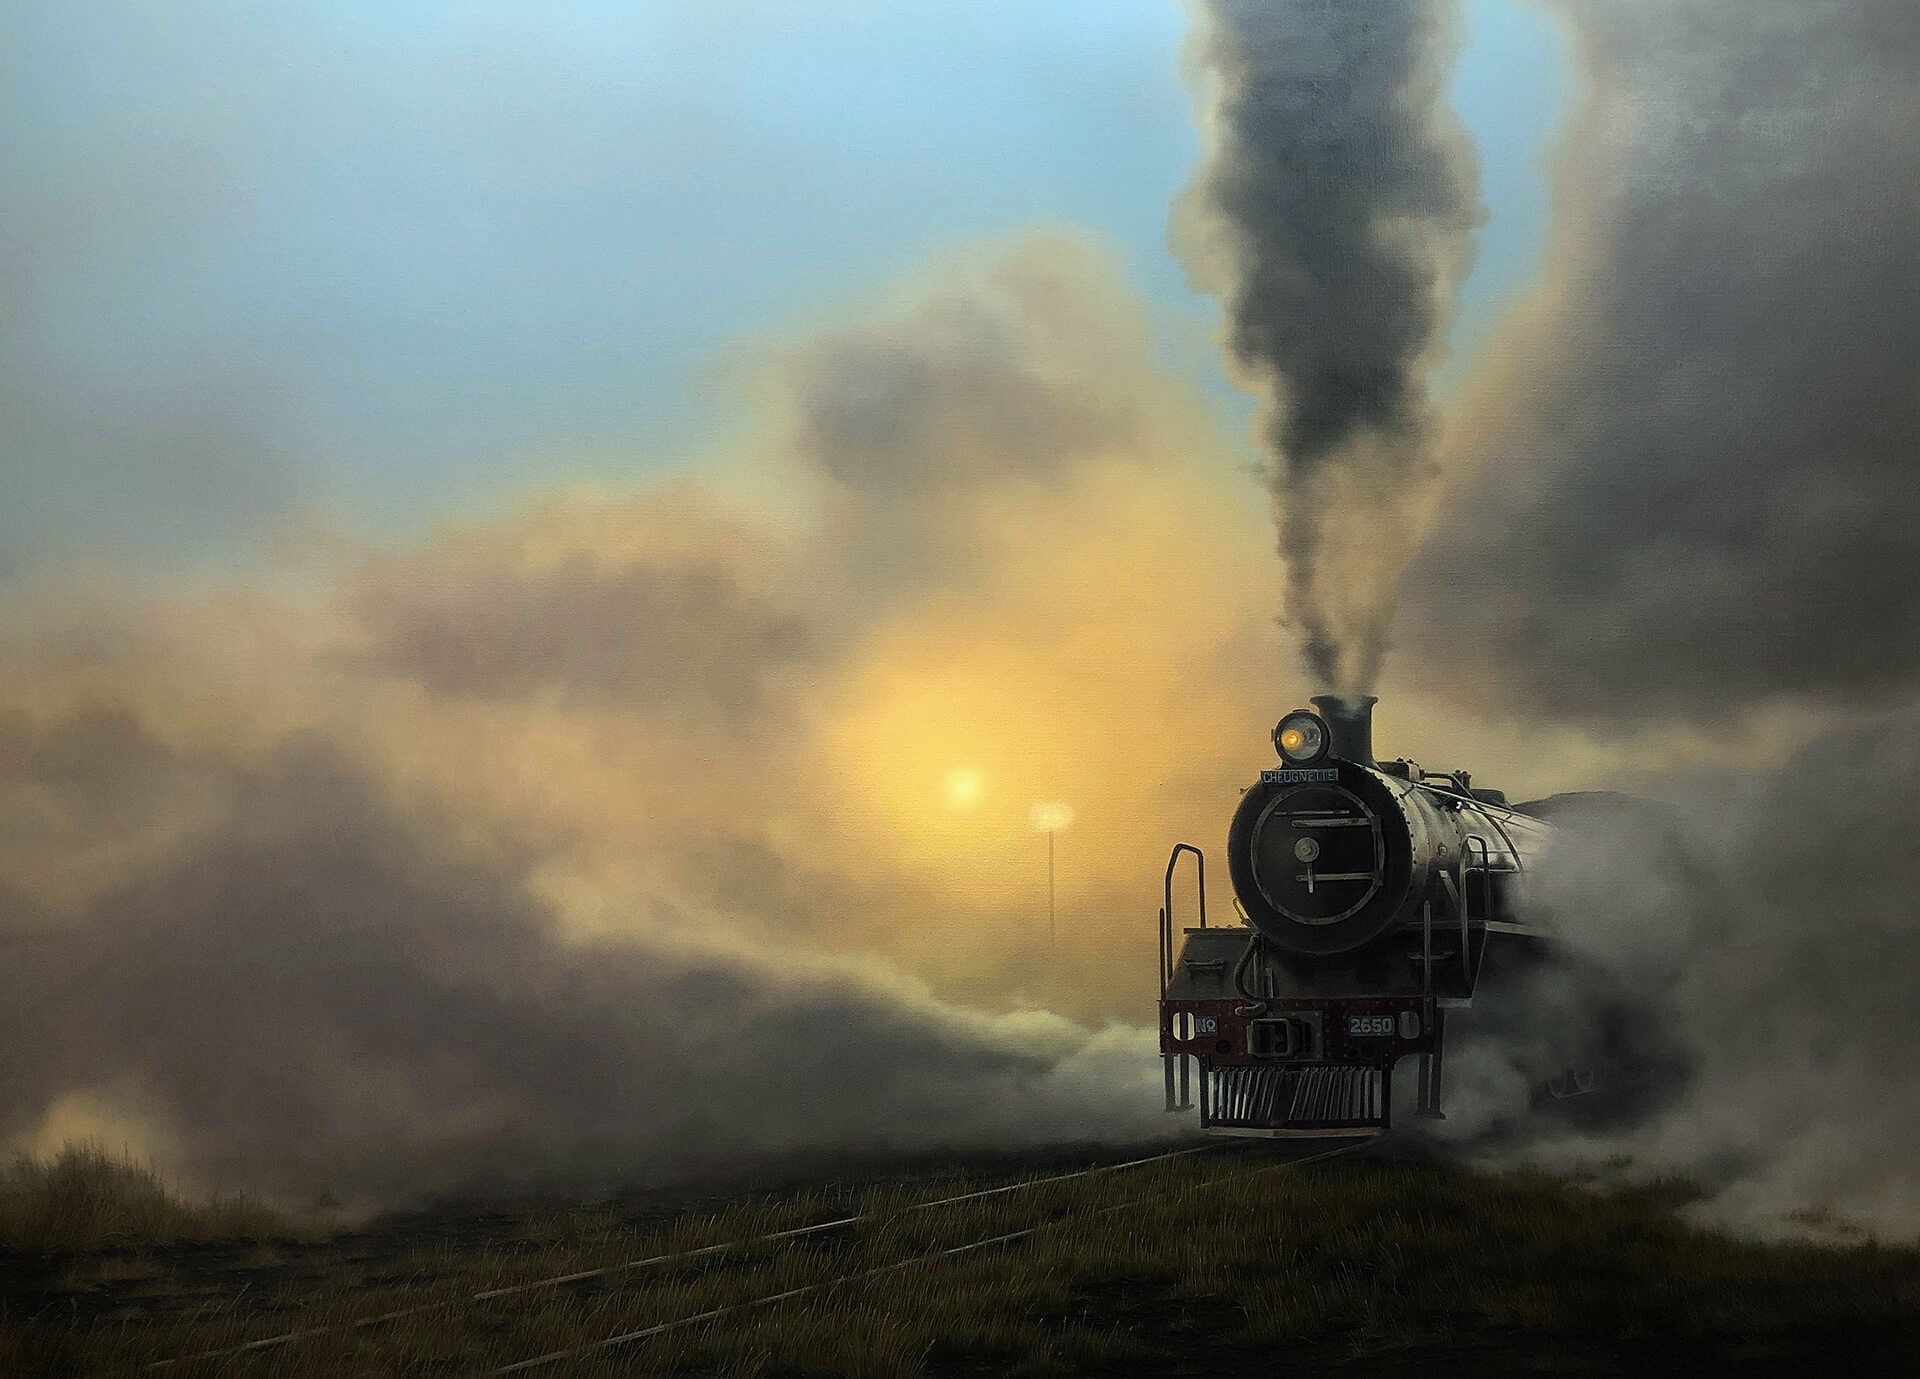 Photorealistic painting of an old steam train